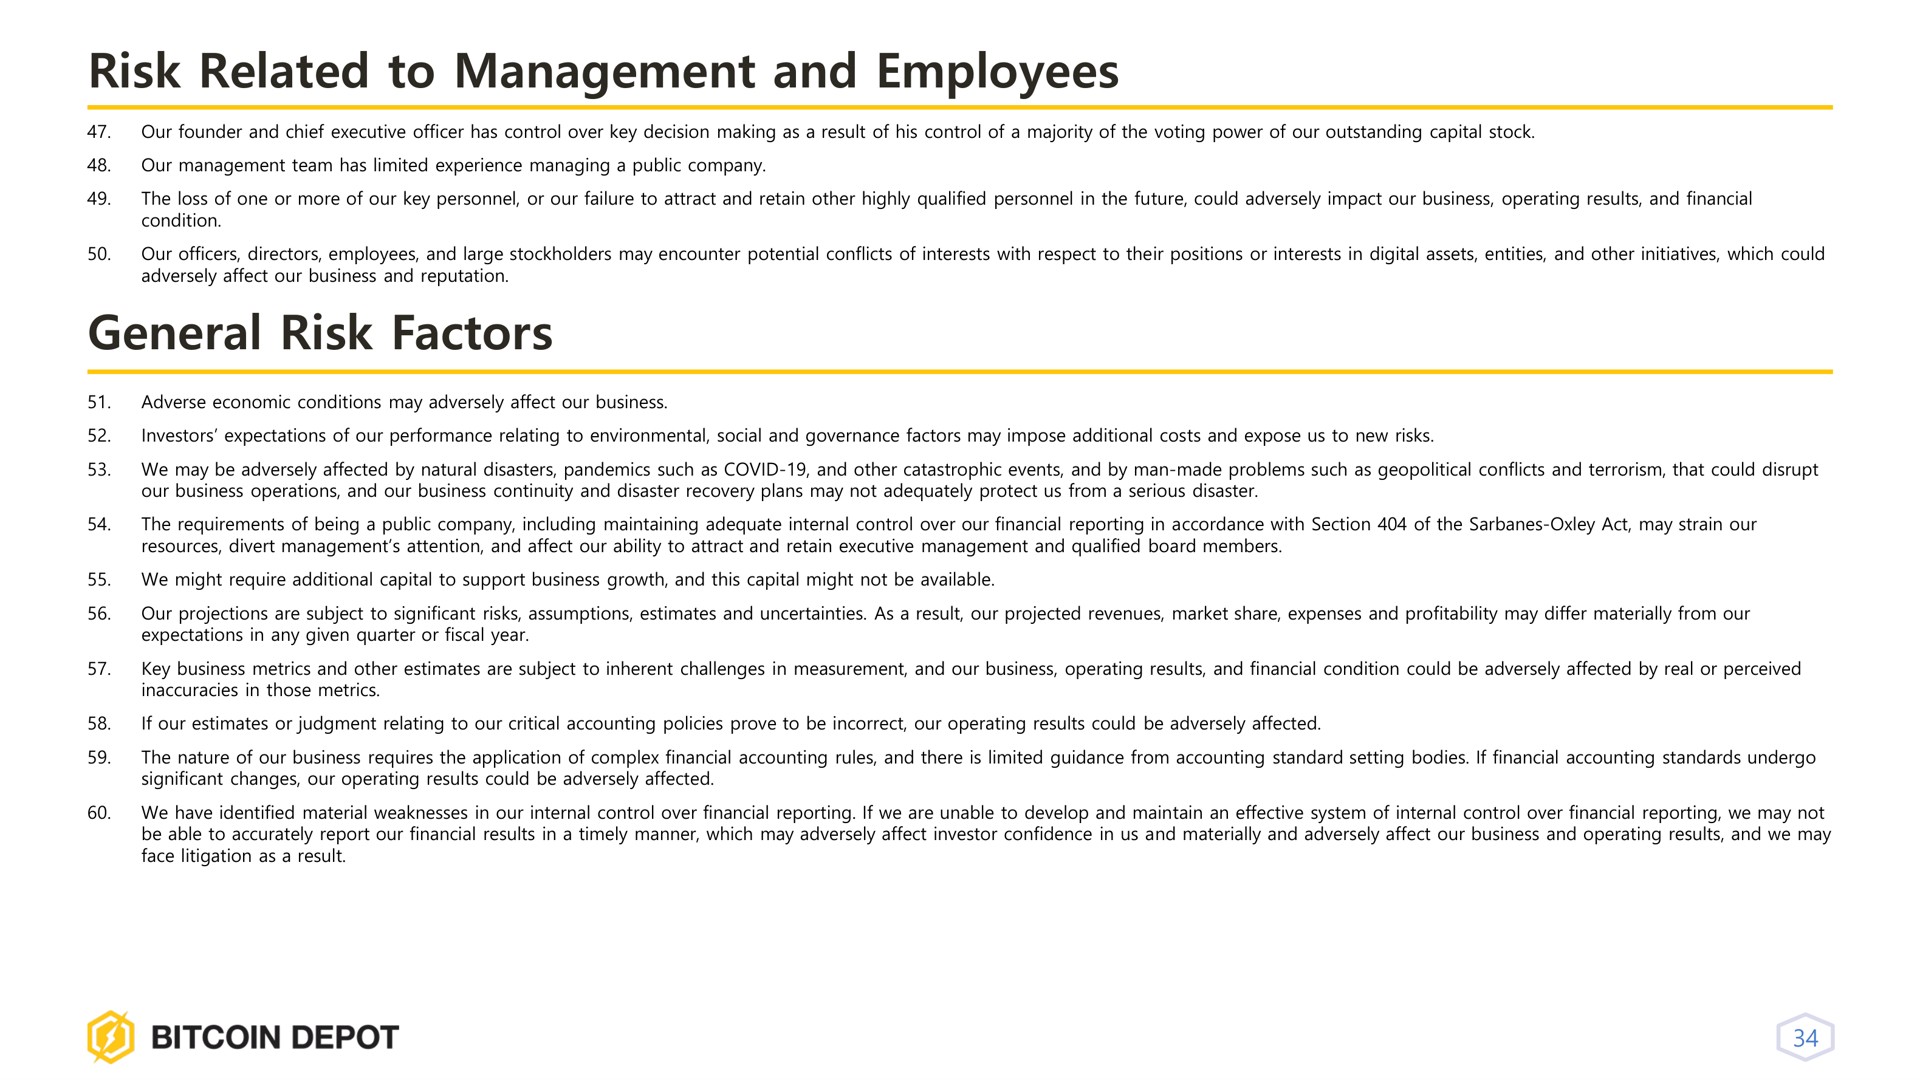 risk related to management and employees general risk factors | Bitcoin Depot